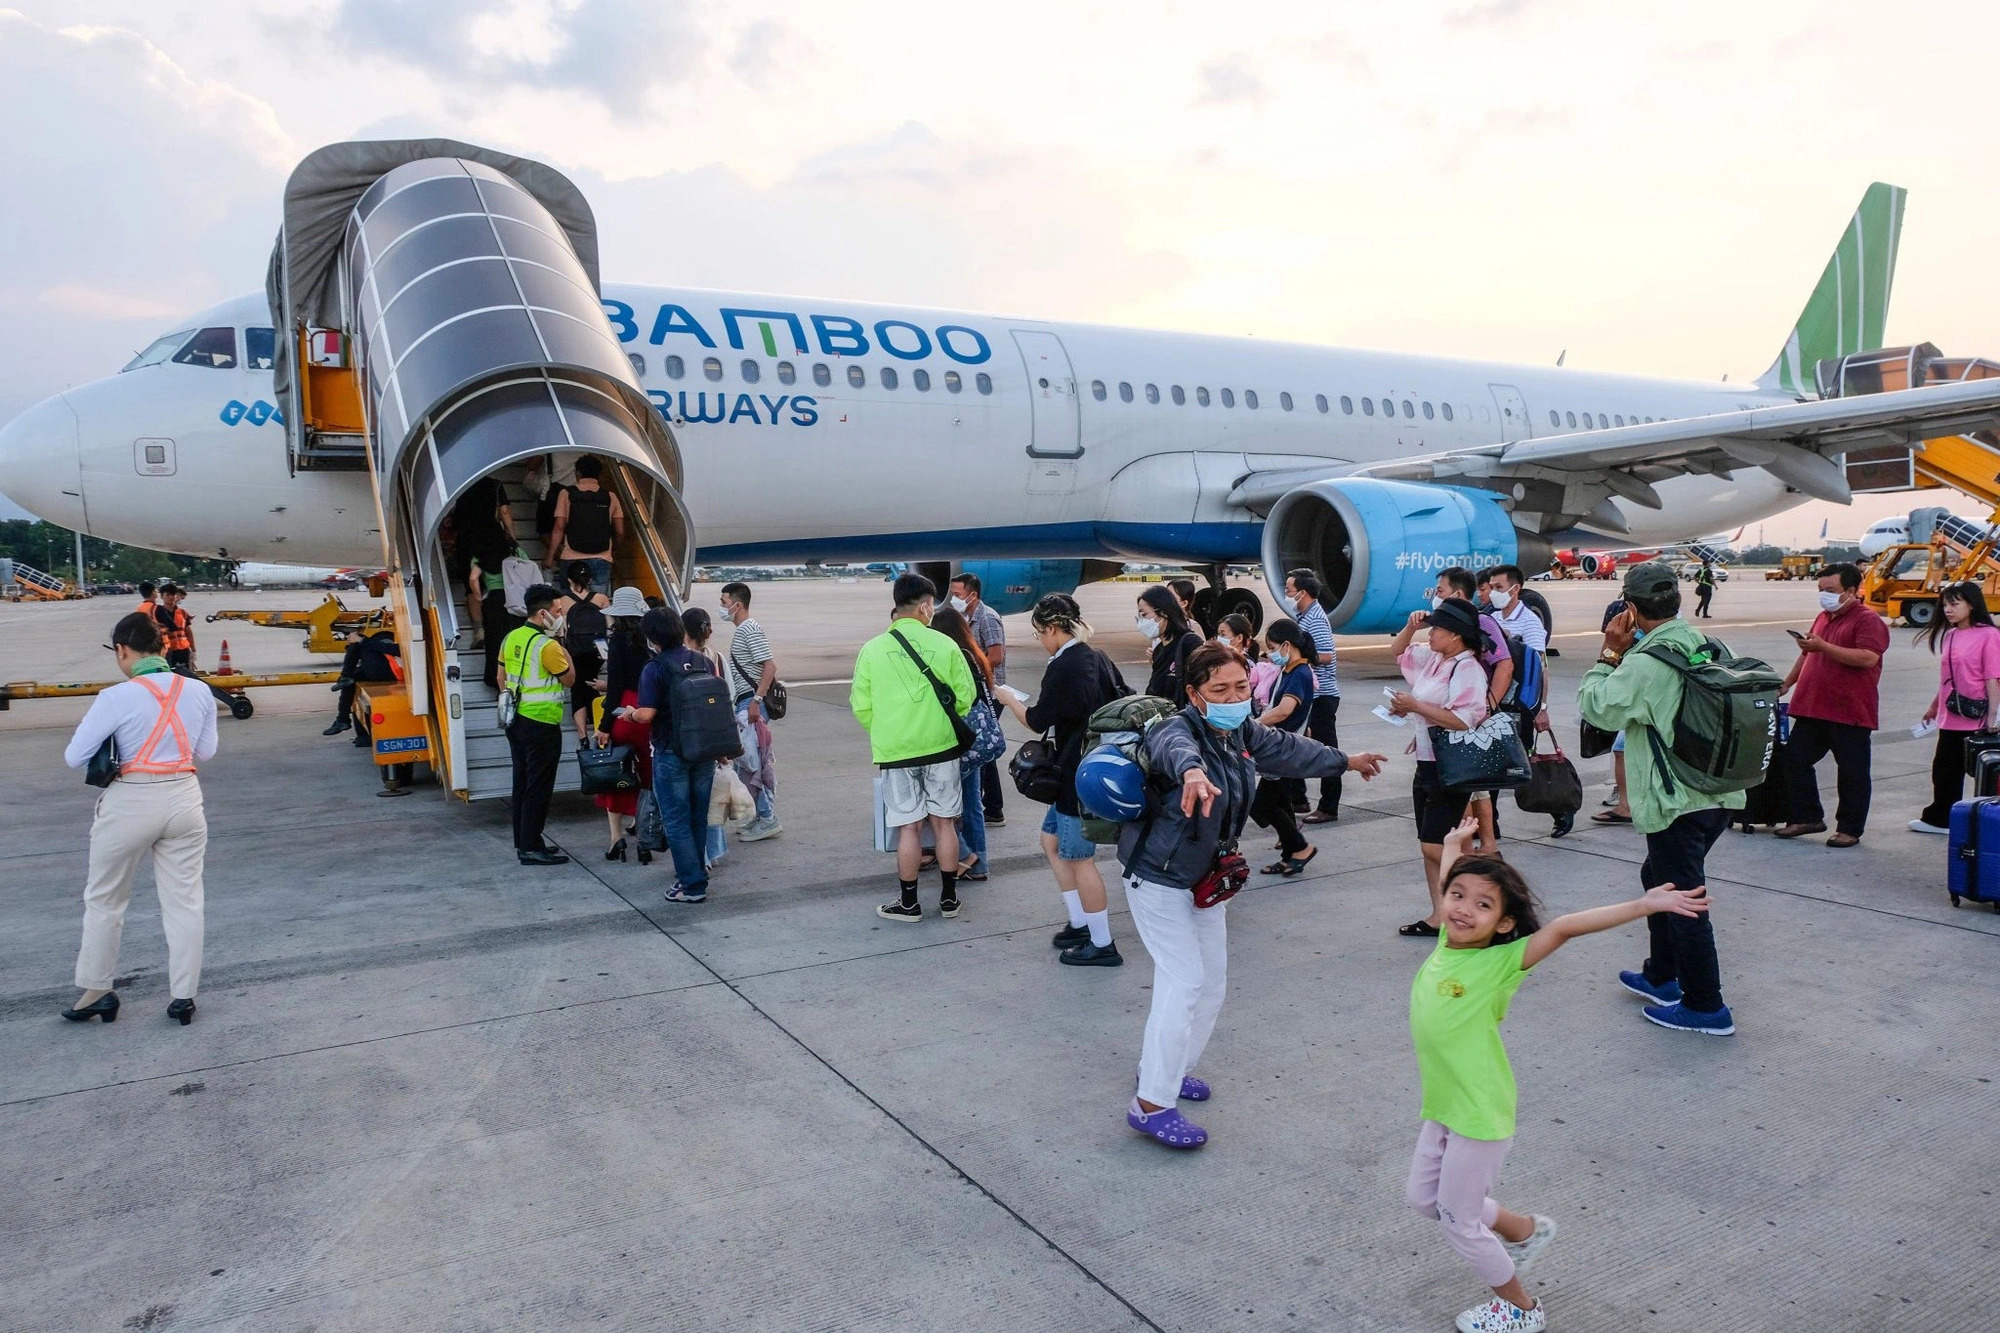 Pacific Airlines, a member company under Vietnam Airlines Group, would be the next one to offer the ground services to Bamboo Airways flights. Photo: Quang Dinh / Tuoi Tre